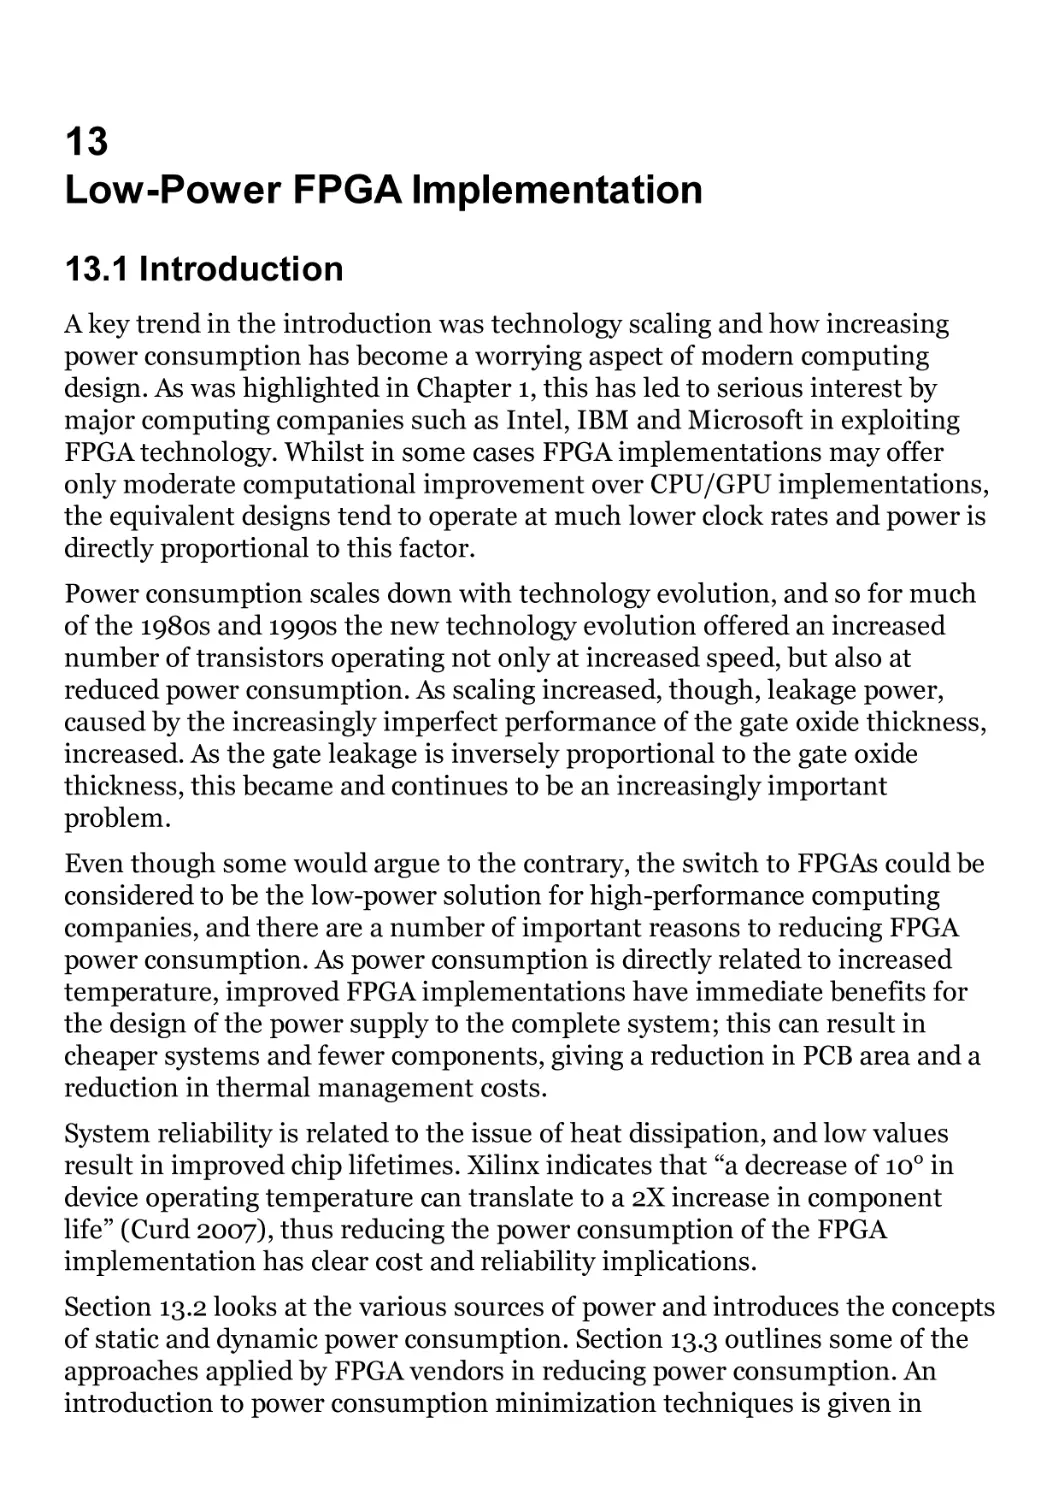 13 Low-Power FPGA Implementation
13.1 Introduction